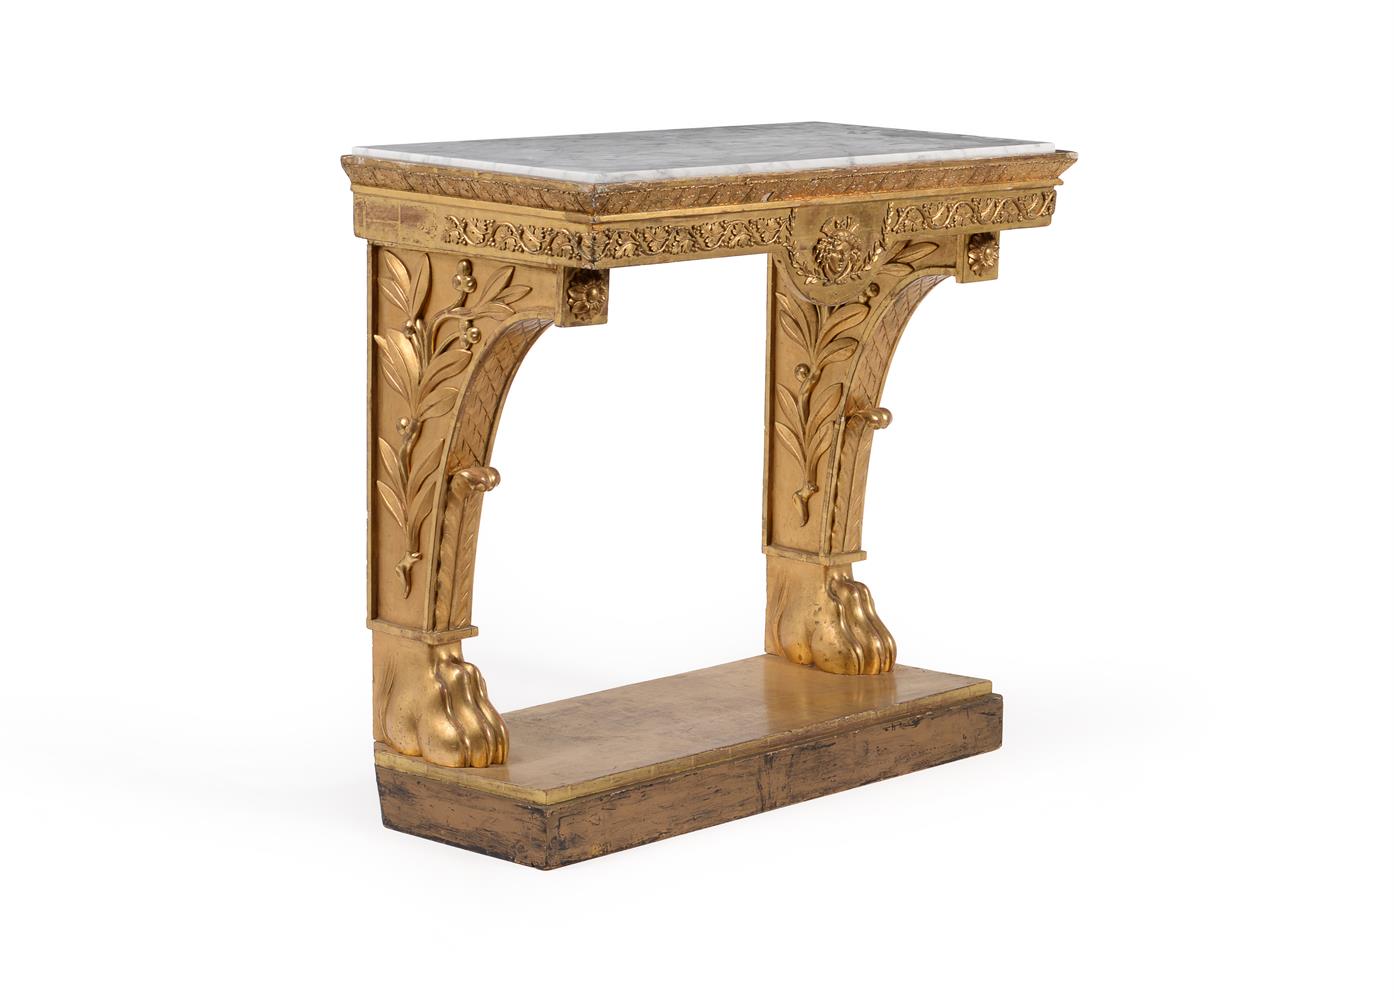 A CARVED GILTWOOD CONSOLE TABLE, FIRST QUARTER 19TH CENTURY - Image 4 of 6